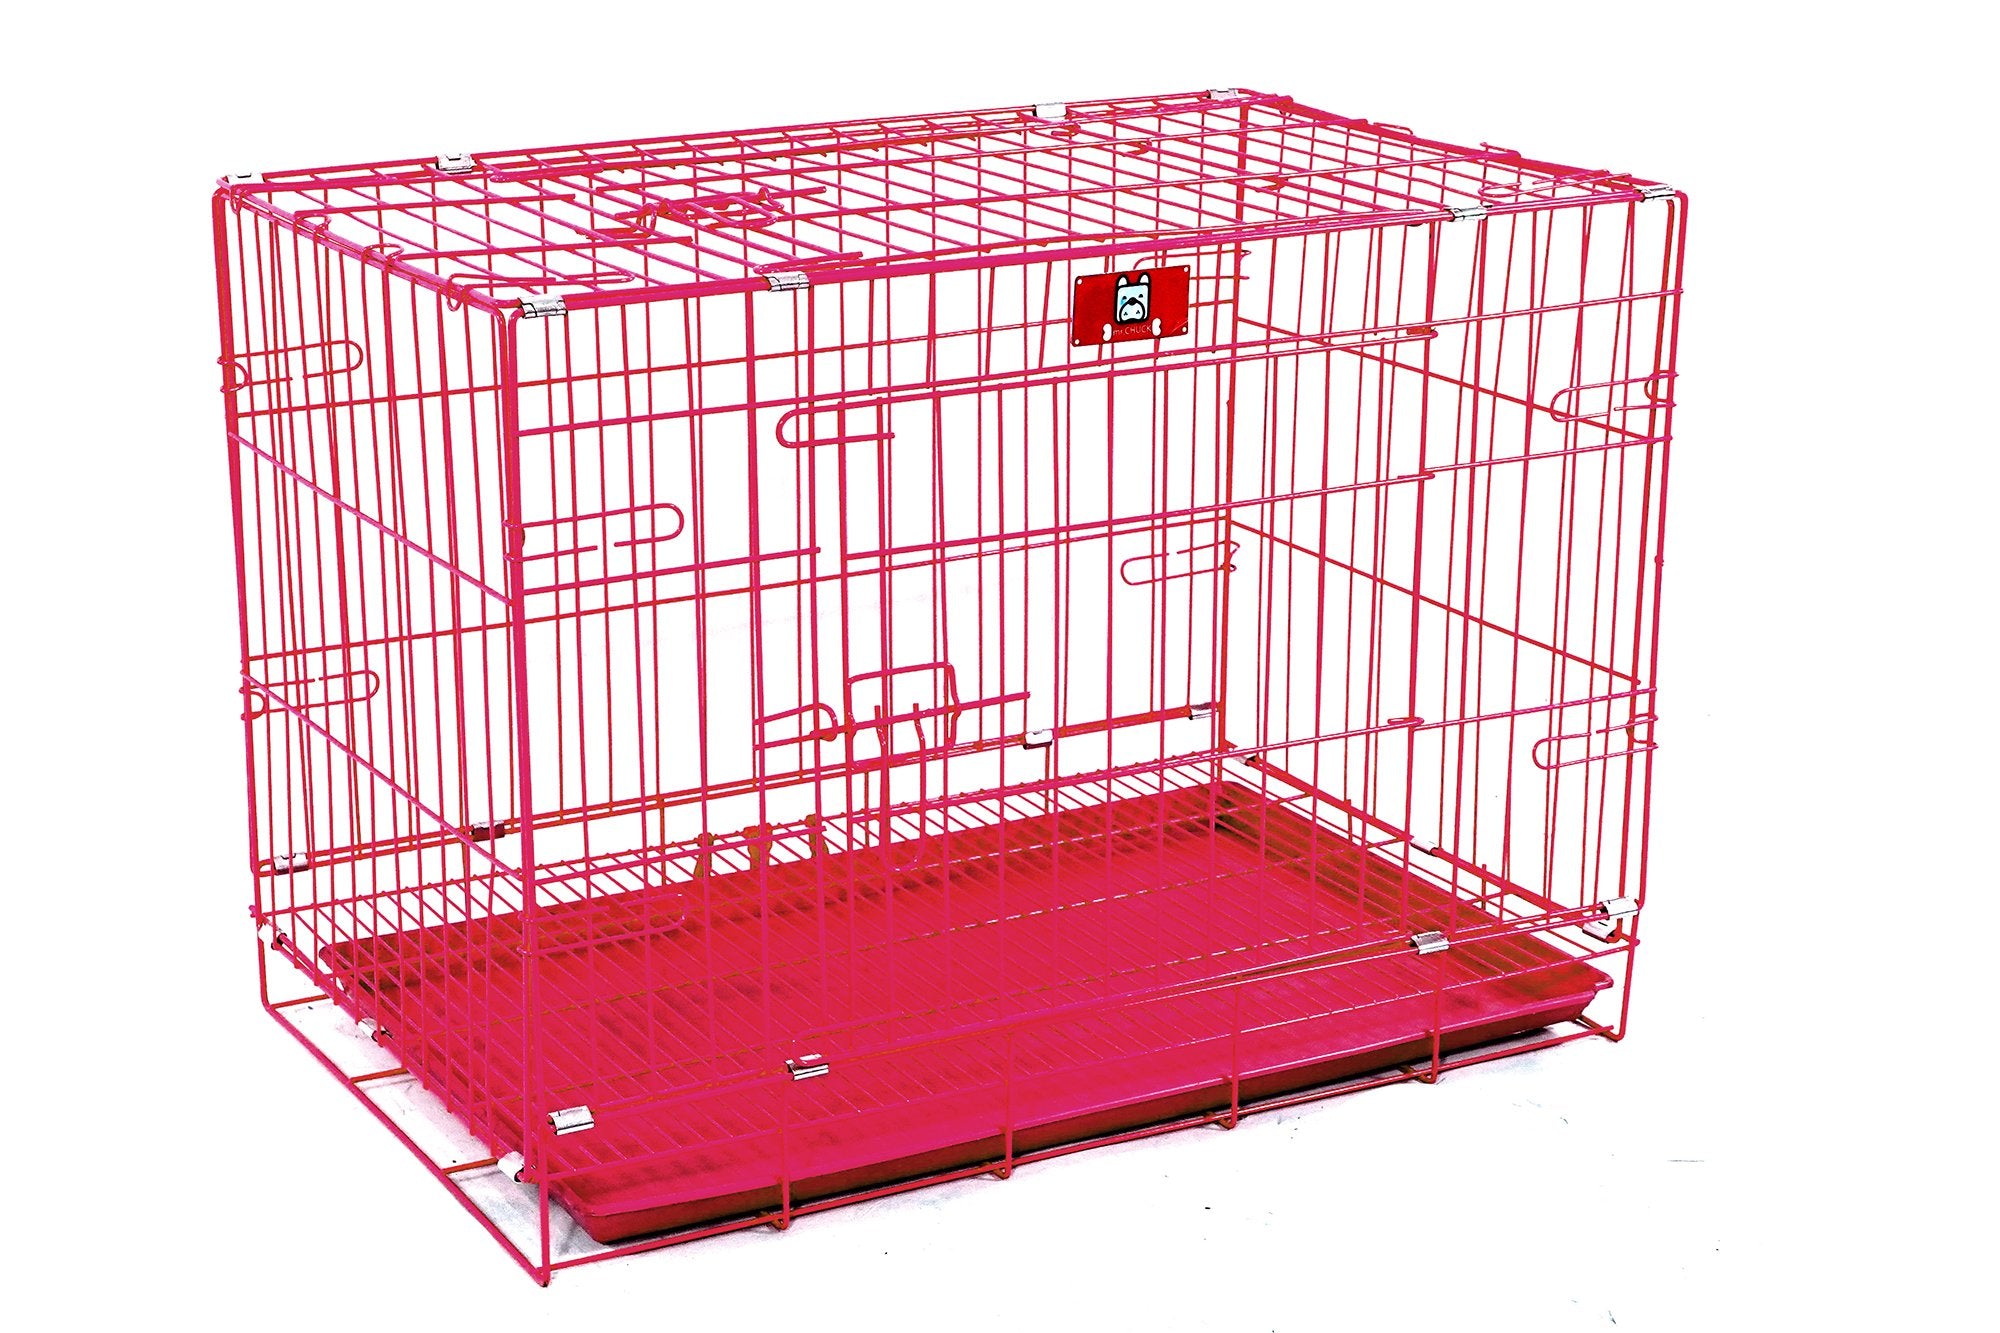 Mr. Chuck - Collapsible Pet Crate Mr. Chuck Pet Store